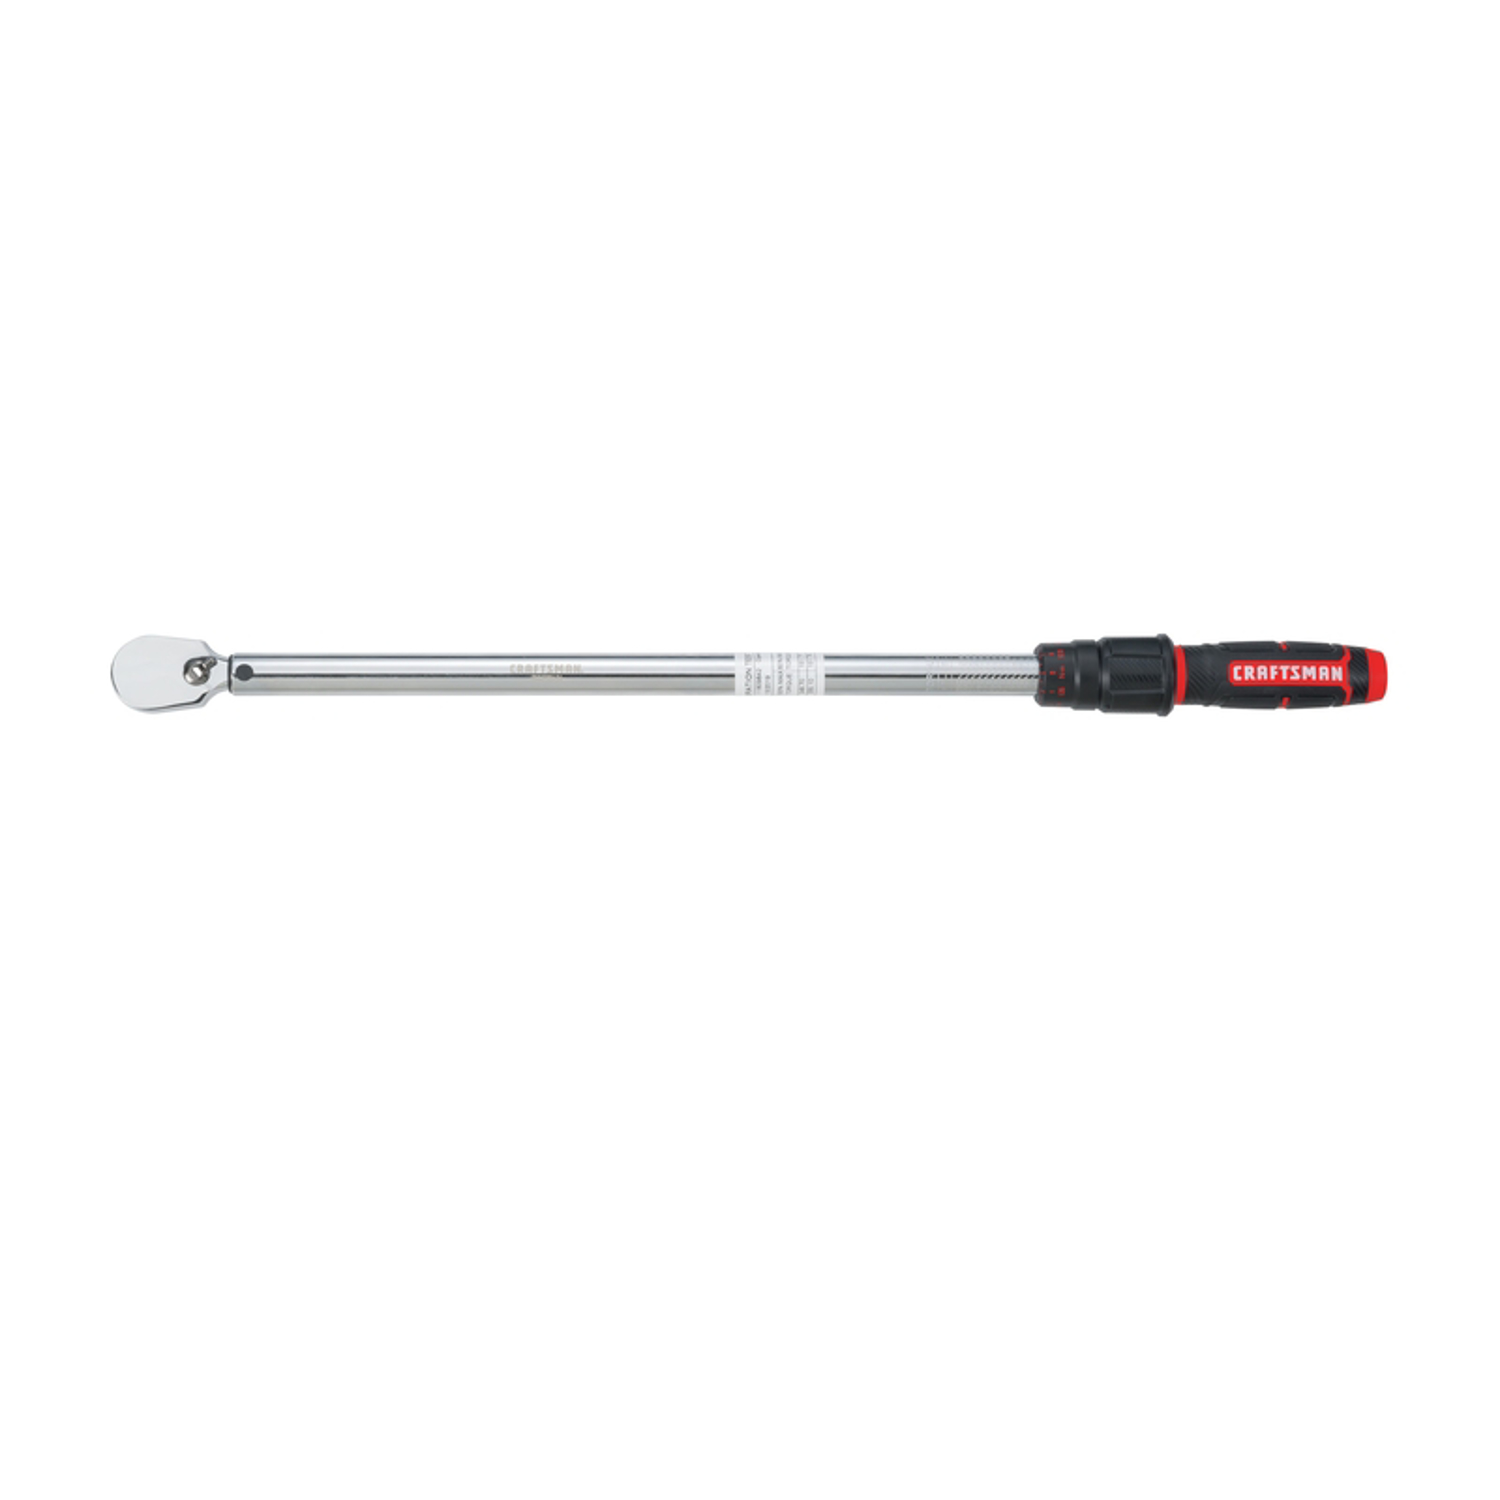 Craftsman 1/2 in. 50-250 ft. lbs. Click Torque Wrench - Ace Hardware